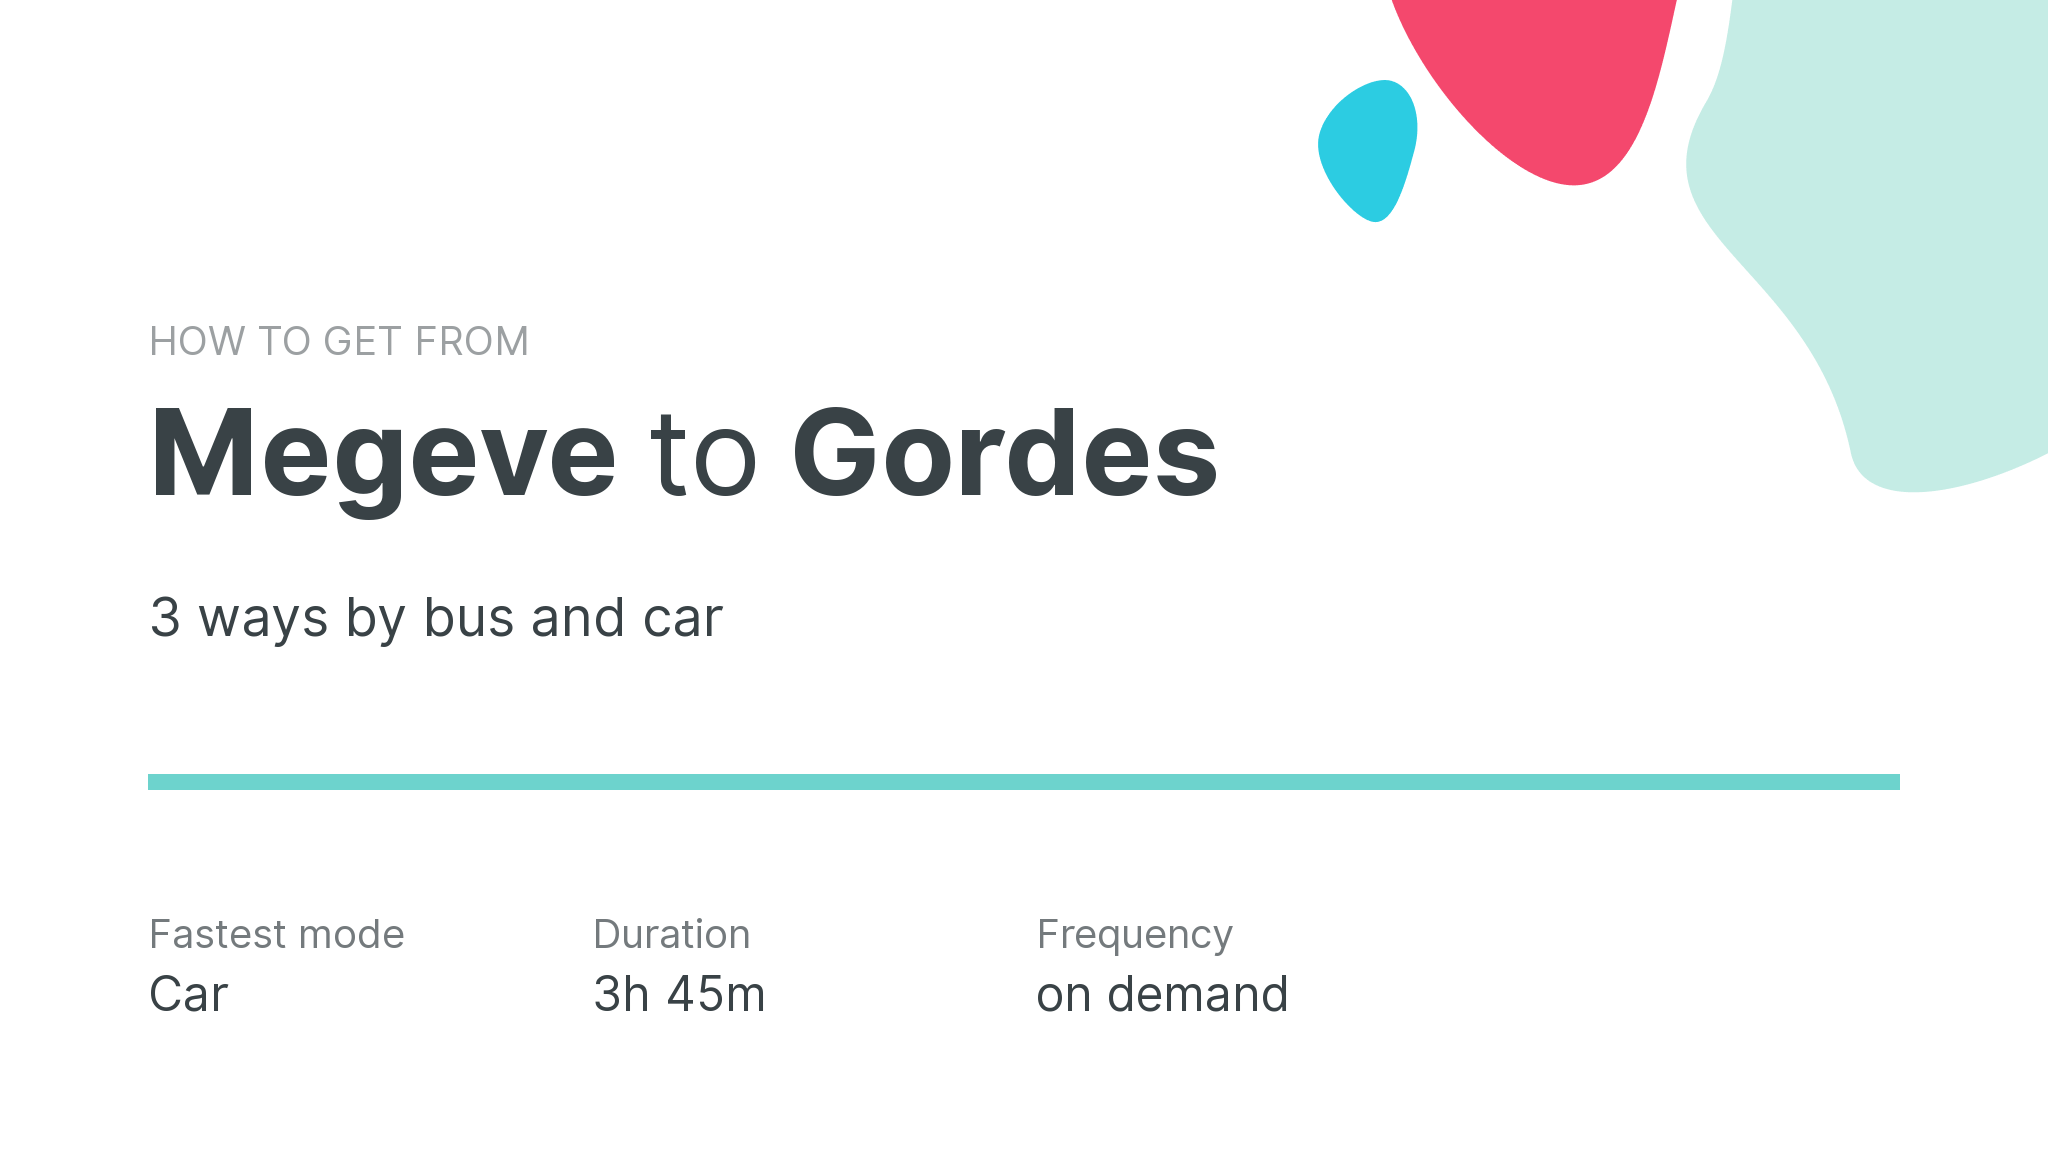 How do I get from Megeve to Gordes